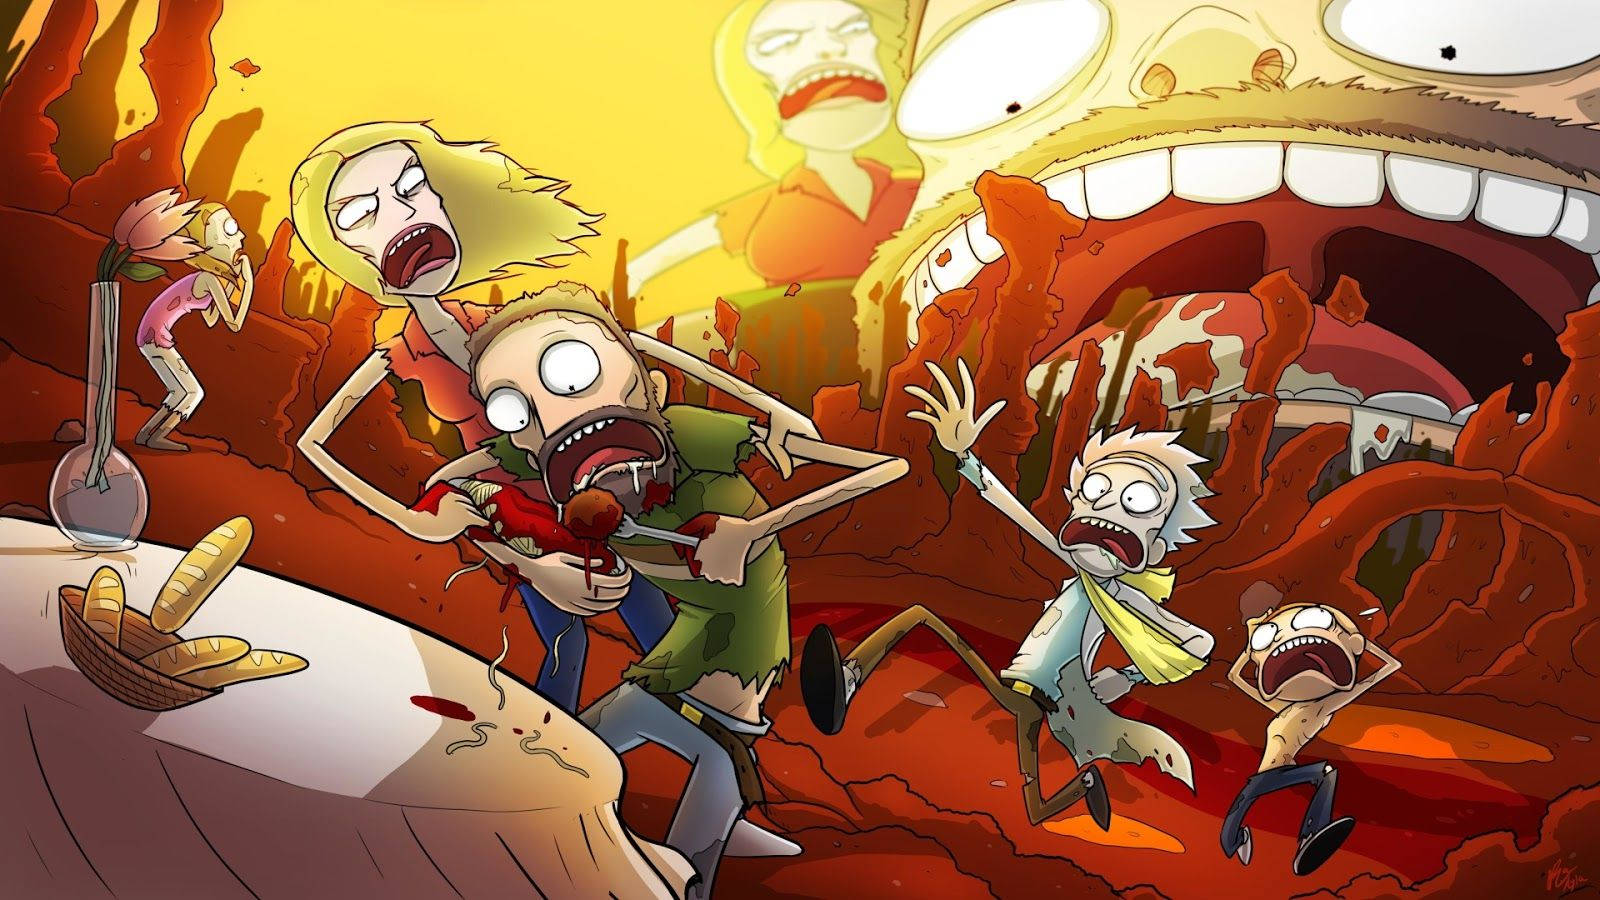 "Toke up and get schwifty with Rick and Morty!" Wallpaper